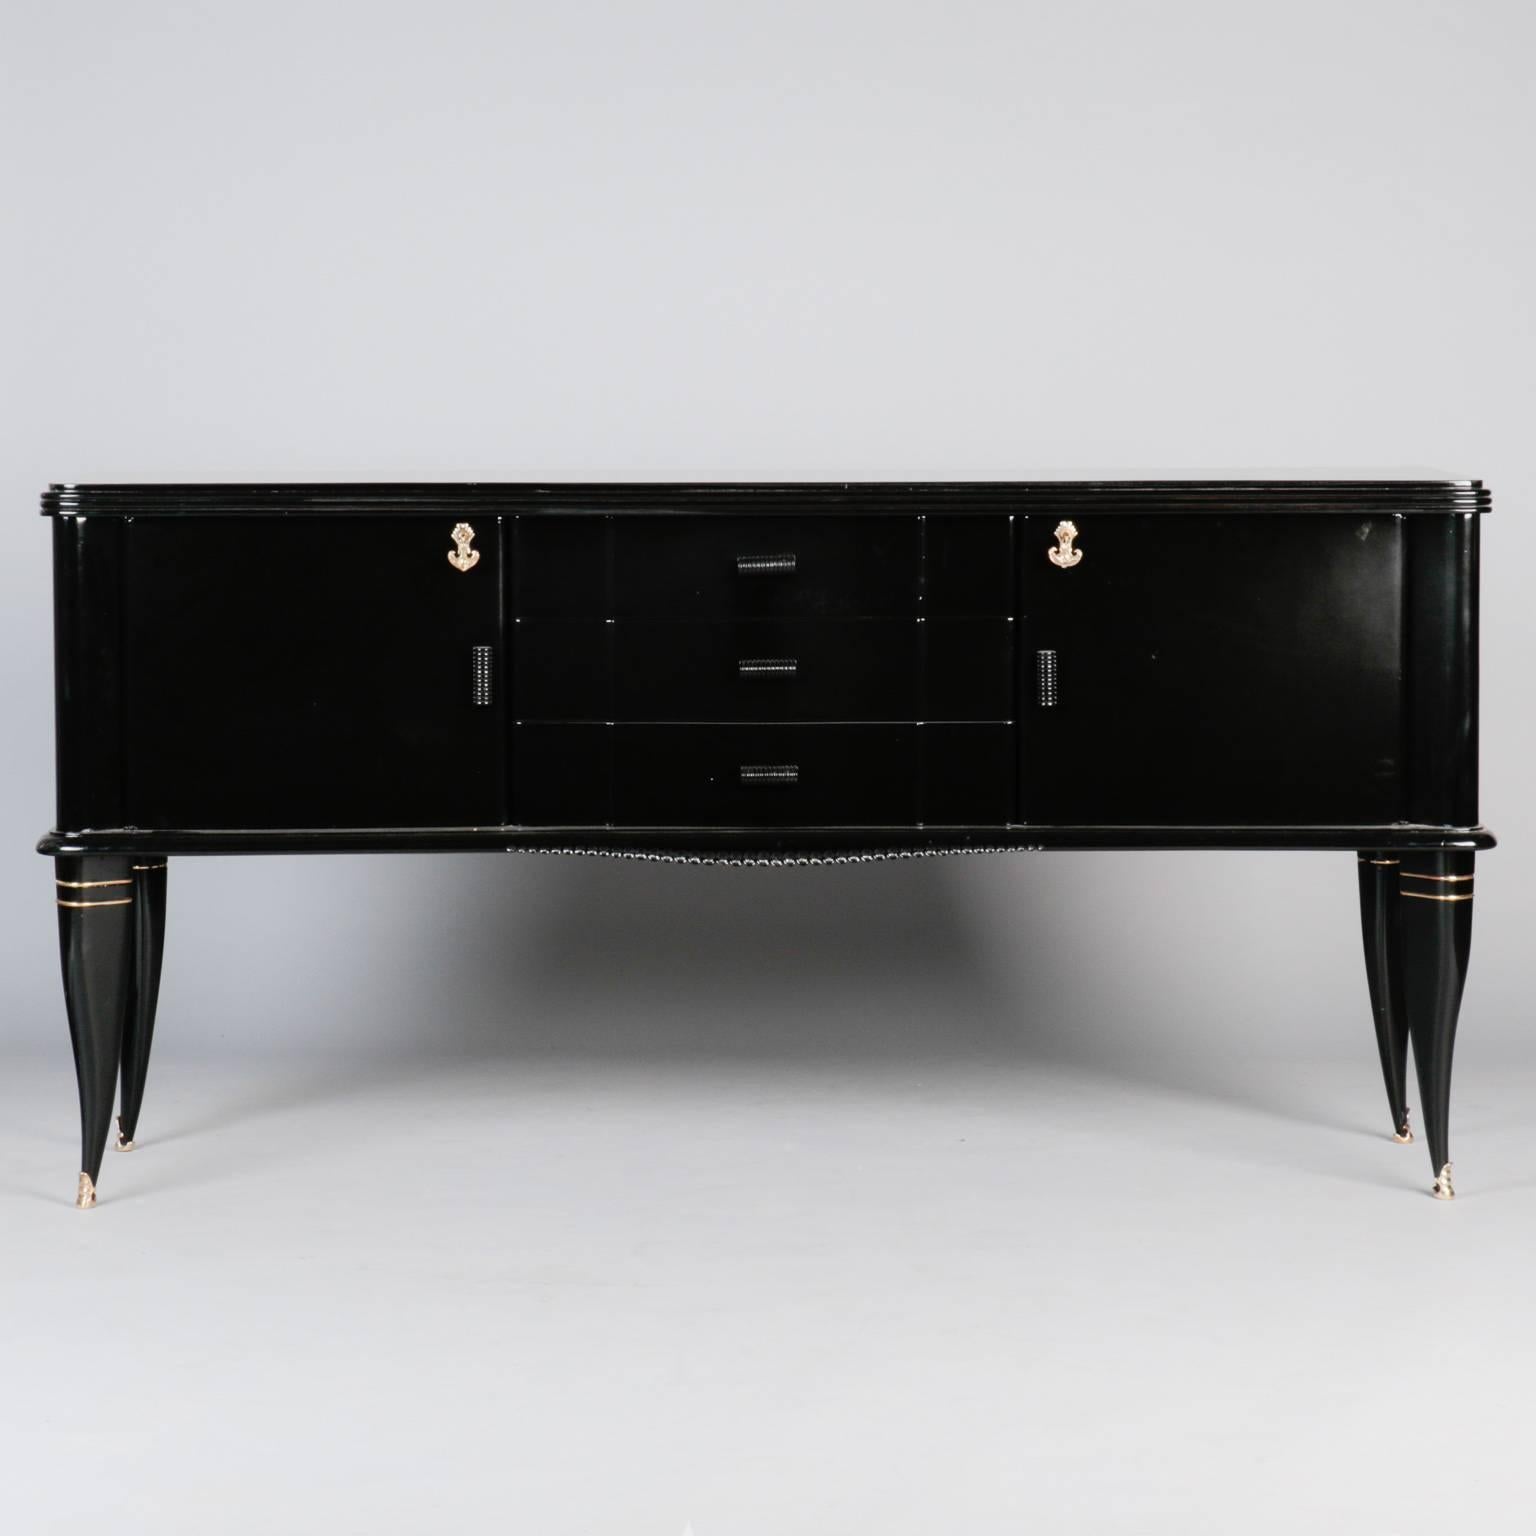 Side board with ebonized finish and brass accents, circa 1930s. Three center functional drawers flanked by side cabinets with hinged and locking doors. Curvy tapered legs with brass feet and accents. Very good vintage condition.